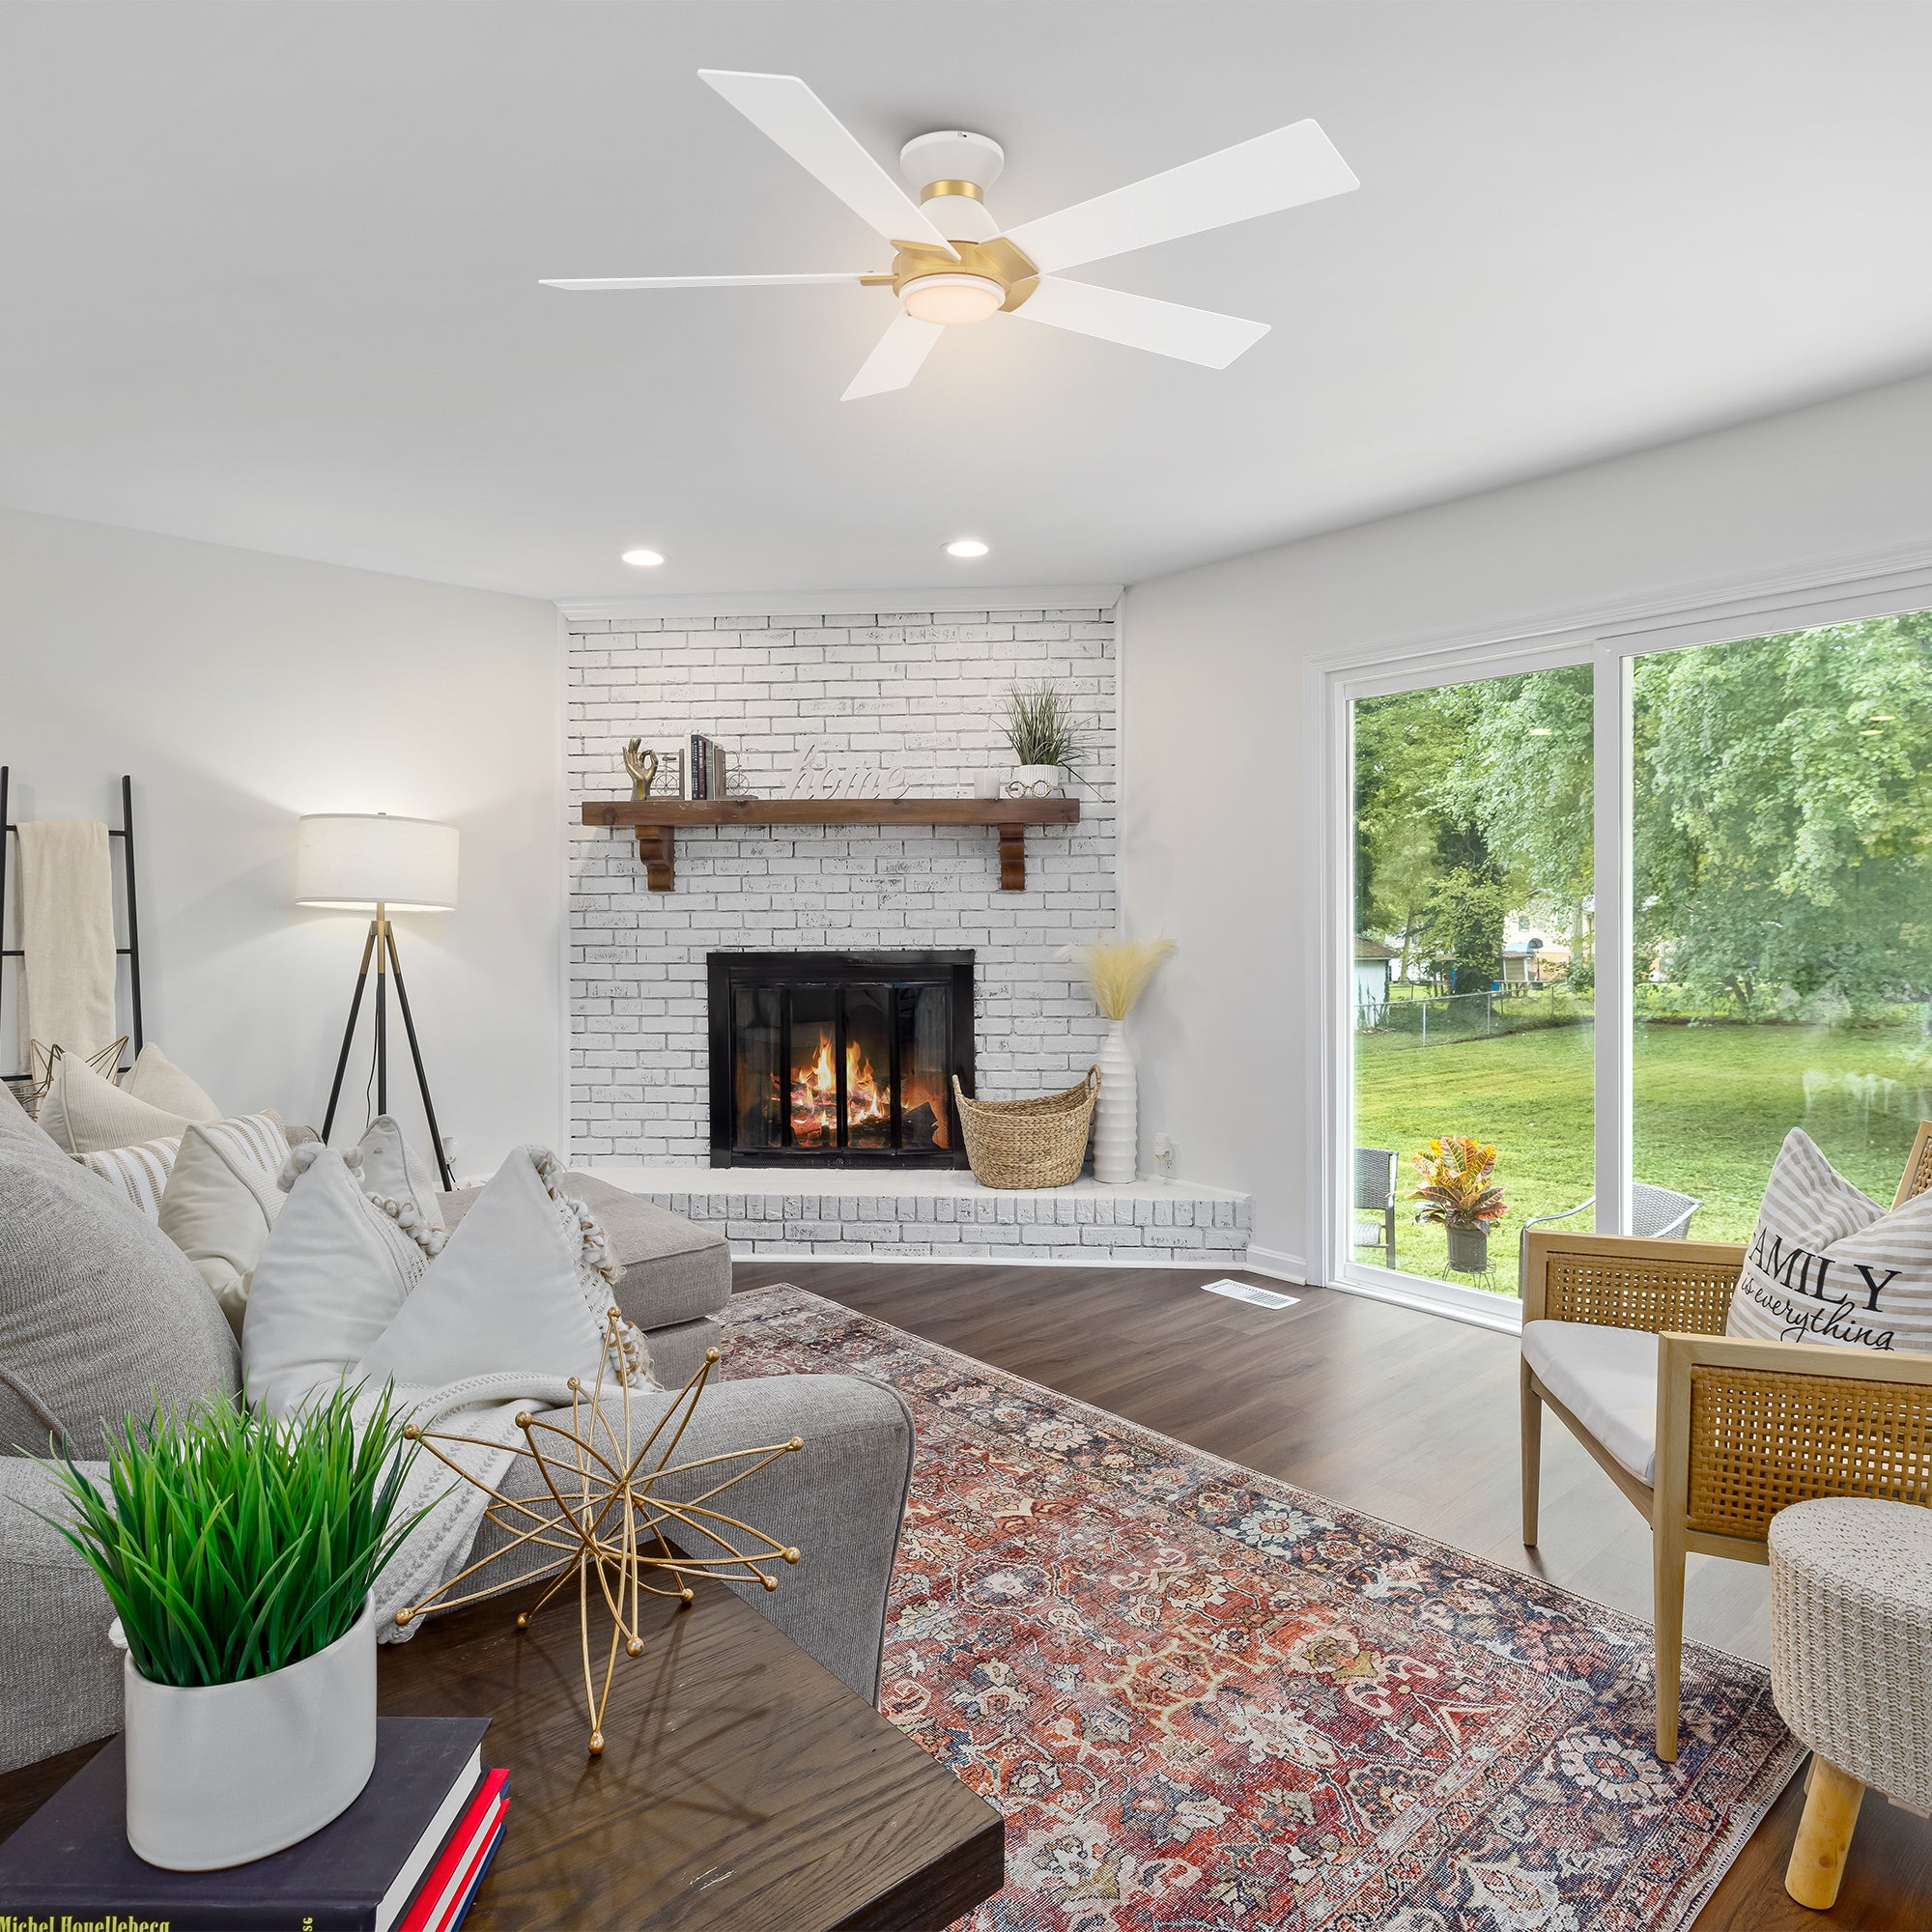 This Aspen 52&#39;&#39; flush mount smart ceiling fan keeps your space cool, bright, and stylish. It is a soft modern masterpiece perfect for your large indoor living spaces. This Wifi smart ceiling fan is a simplicity designing with Black finish, use elegant Plywood blades and has an integrated 4000K LED daylight. The fan features Remote control, Wi-Fi apps, Siri Shortcut and Voice control technology (compatible with Amazon Alexa and Google Home Assistant ) to set fan preferences. 